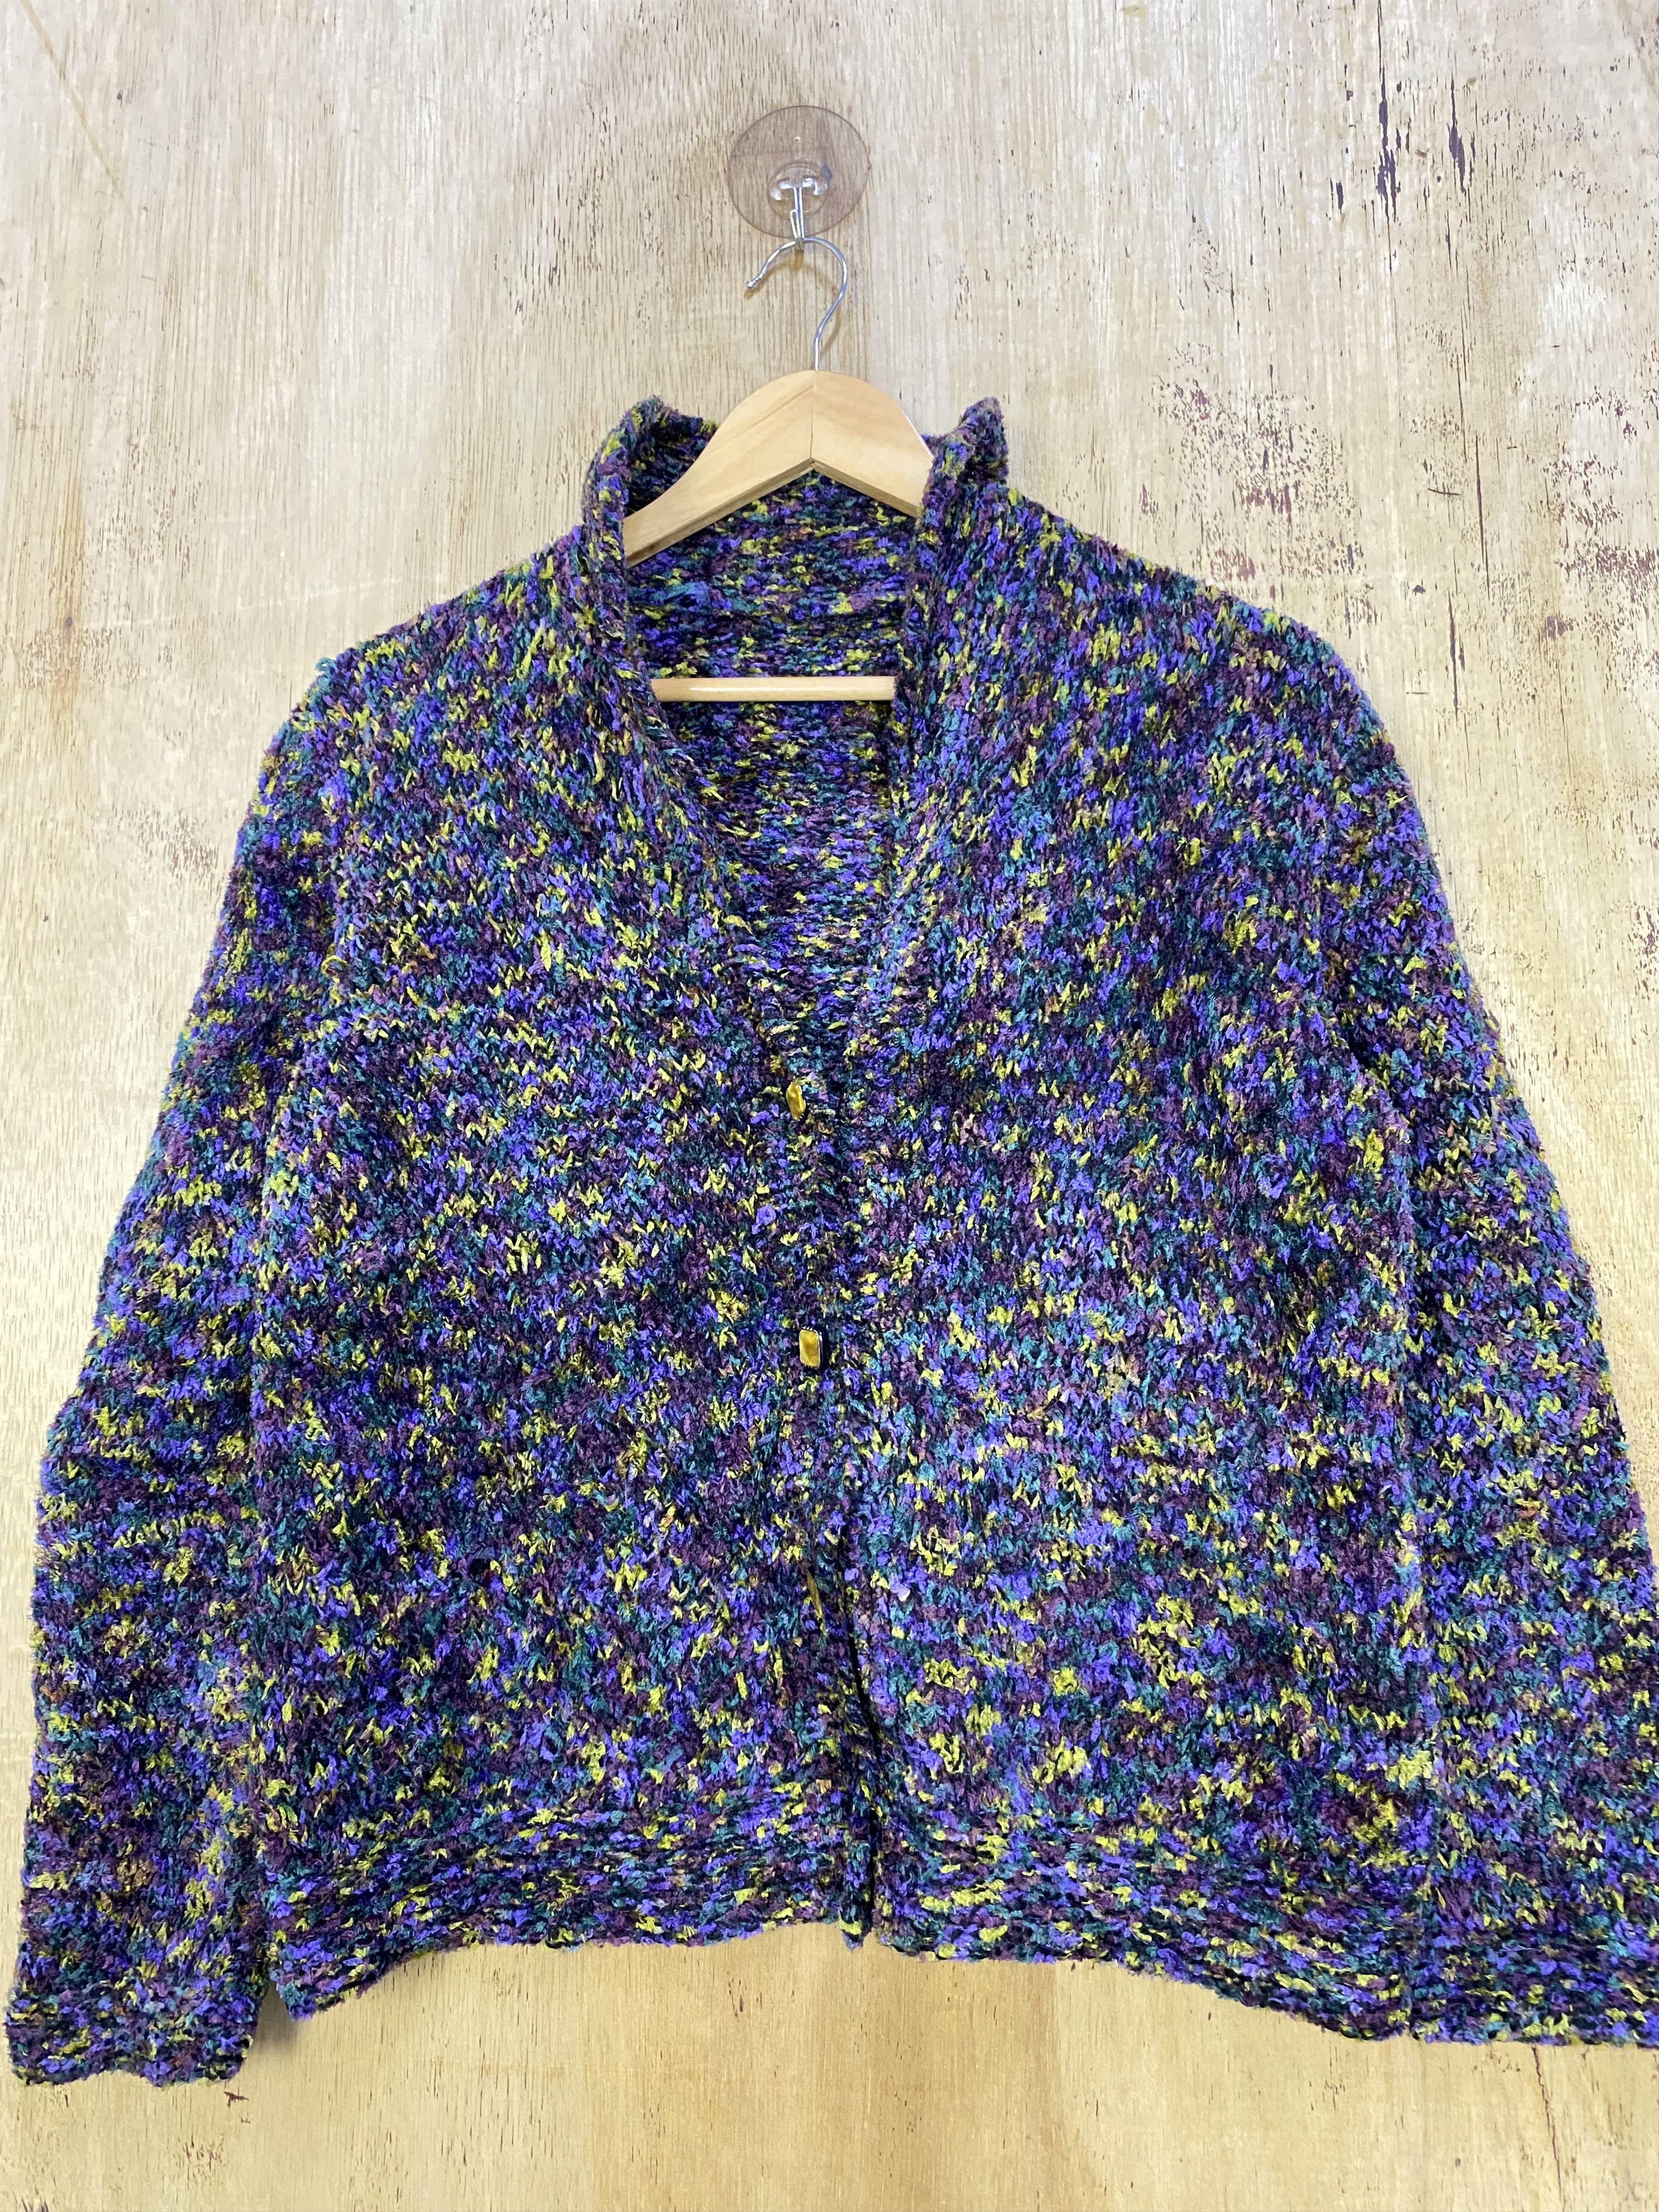 Homespun Knitwear Unbrand Purple Multi-Colourful Knit Cardigan #4311 Size M / US 6-8 / IT 42-44 - 1 Preview